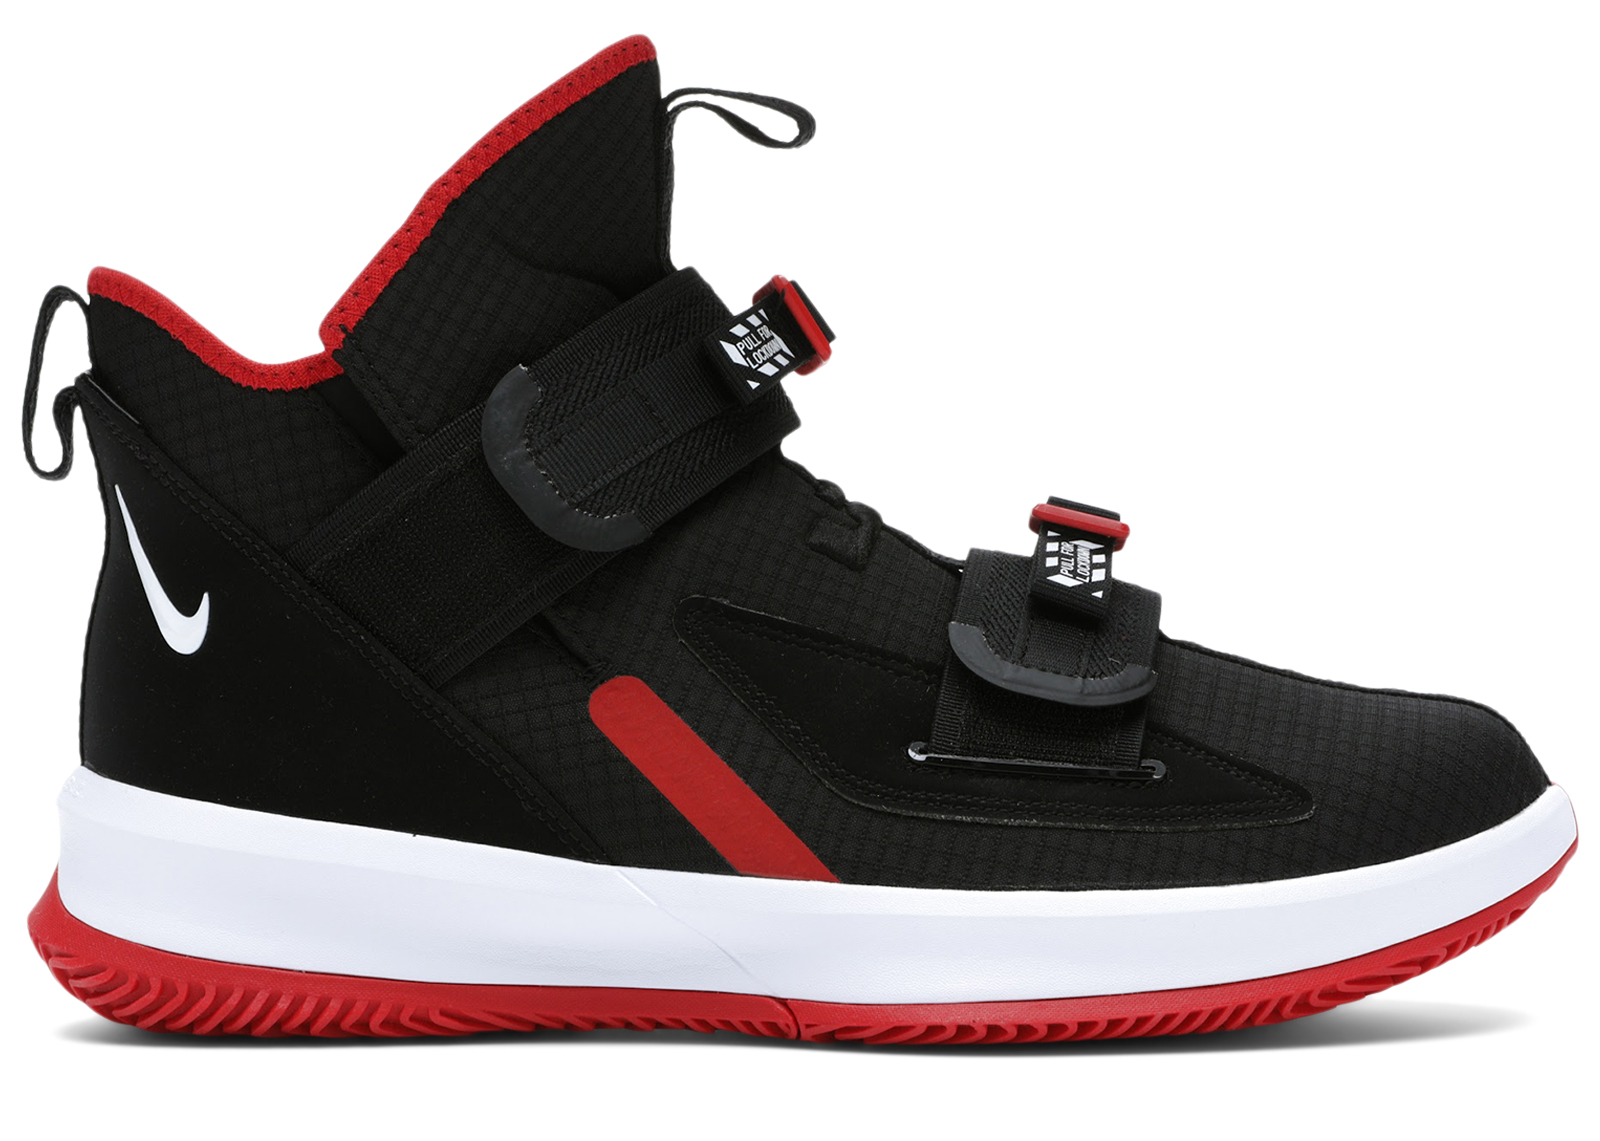 Nike LeBron Soldier 13 Bred - AR4225-003